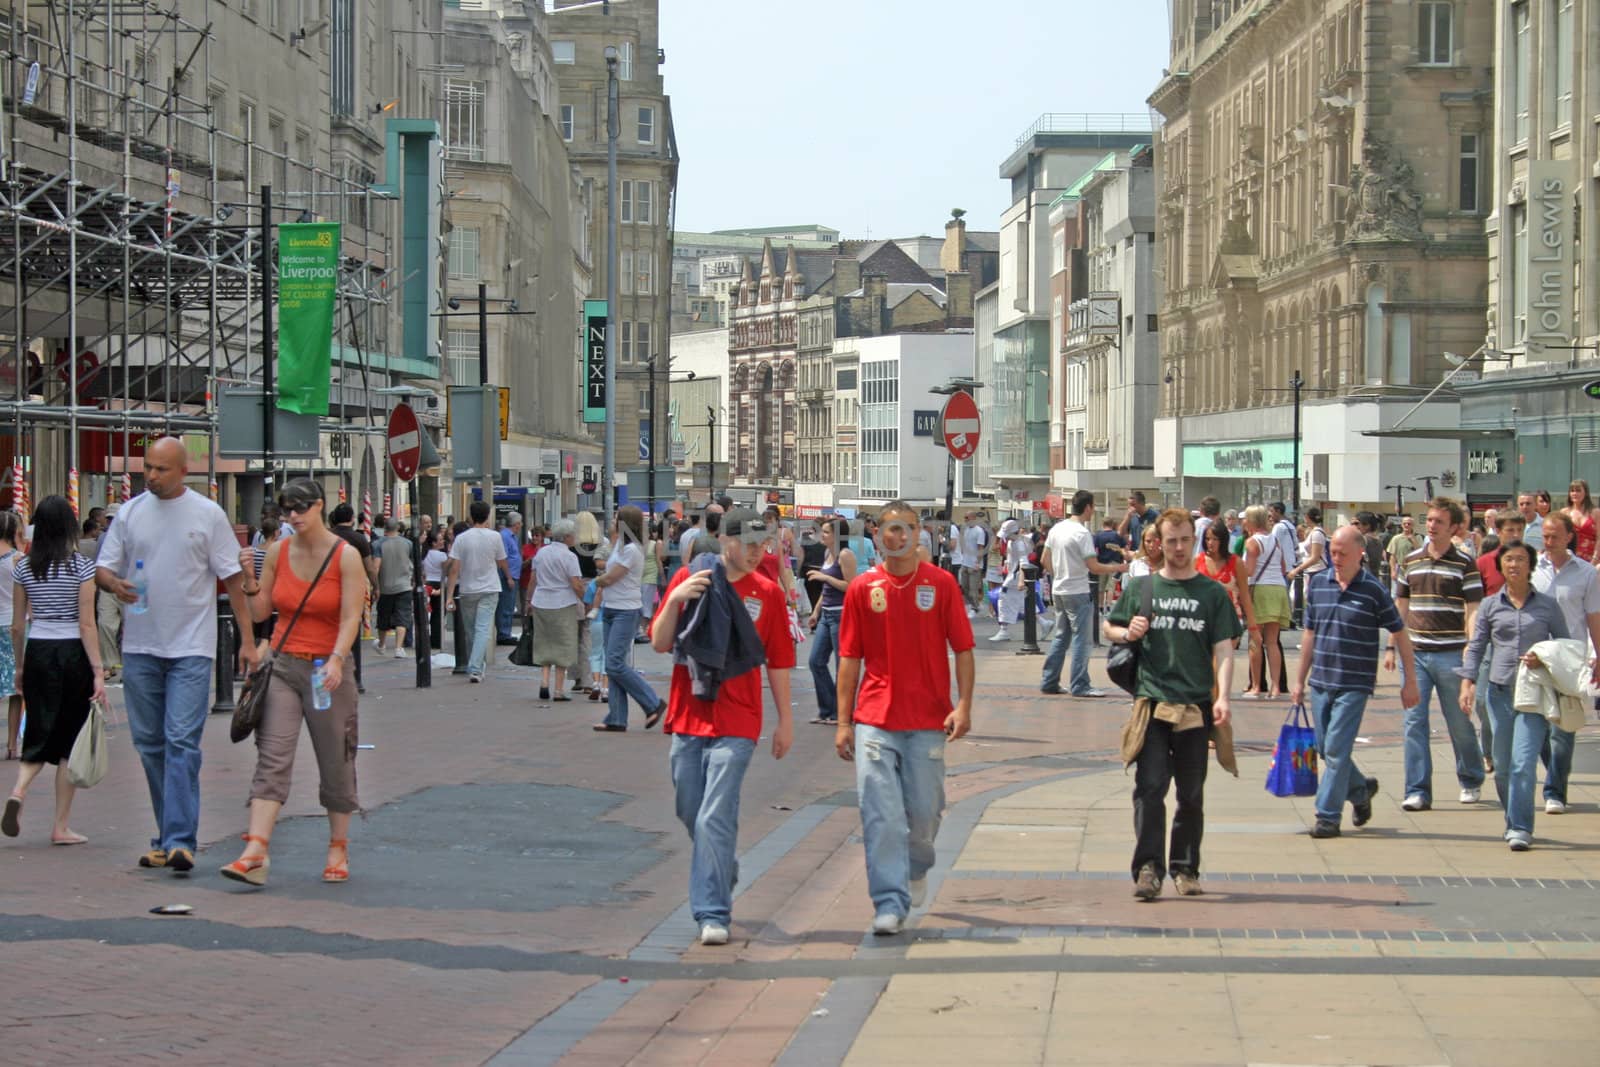 Tourists and Shoppers in Liverpool City England